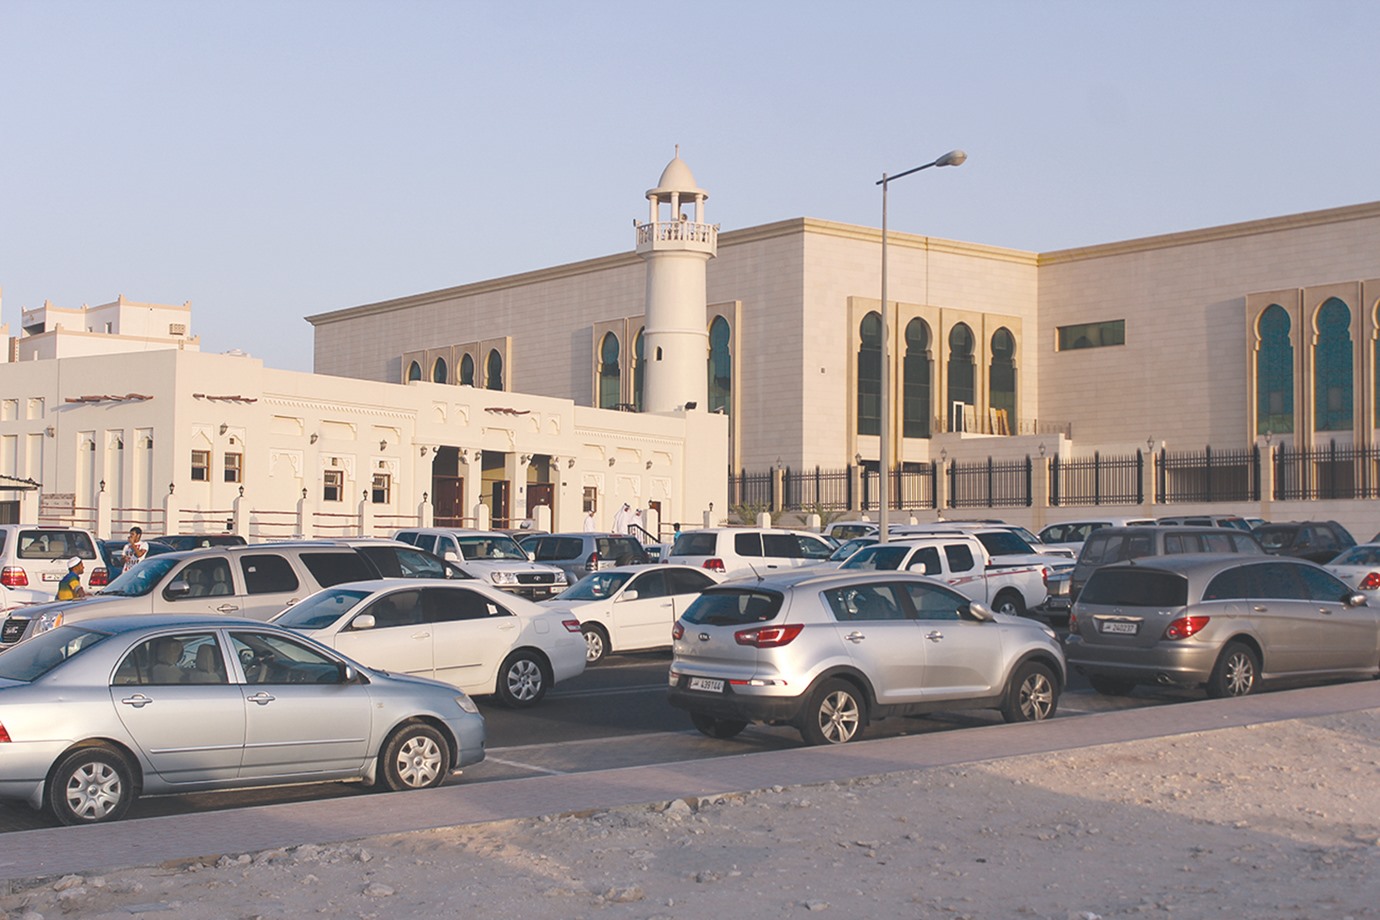 Be sensible when you park your car for Friday Prayer